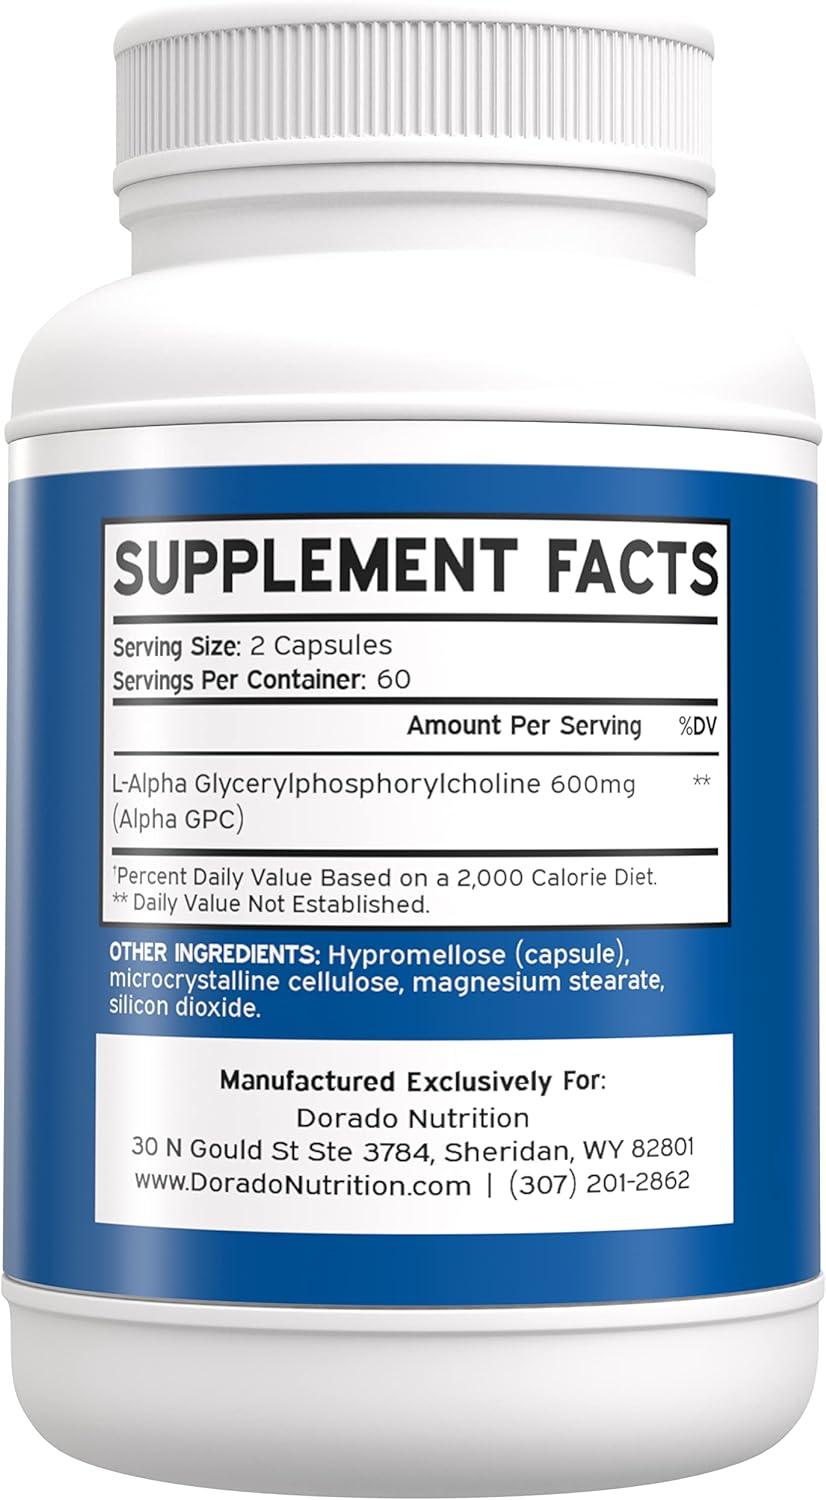 Alpha GPC Choline 600mg Capsules - Brain Support Supplement for Focus,  Memory, Motivation, Energy by Double Wood